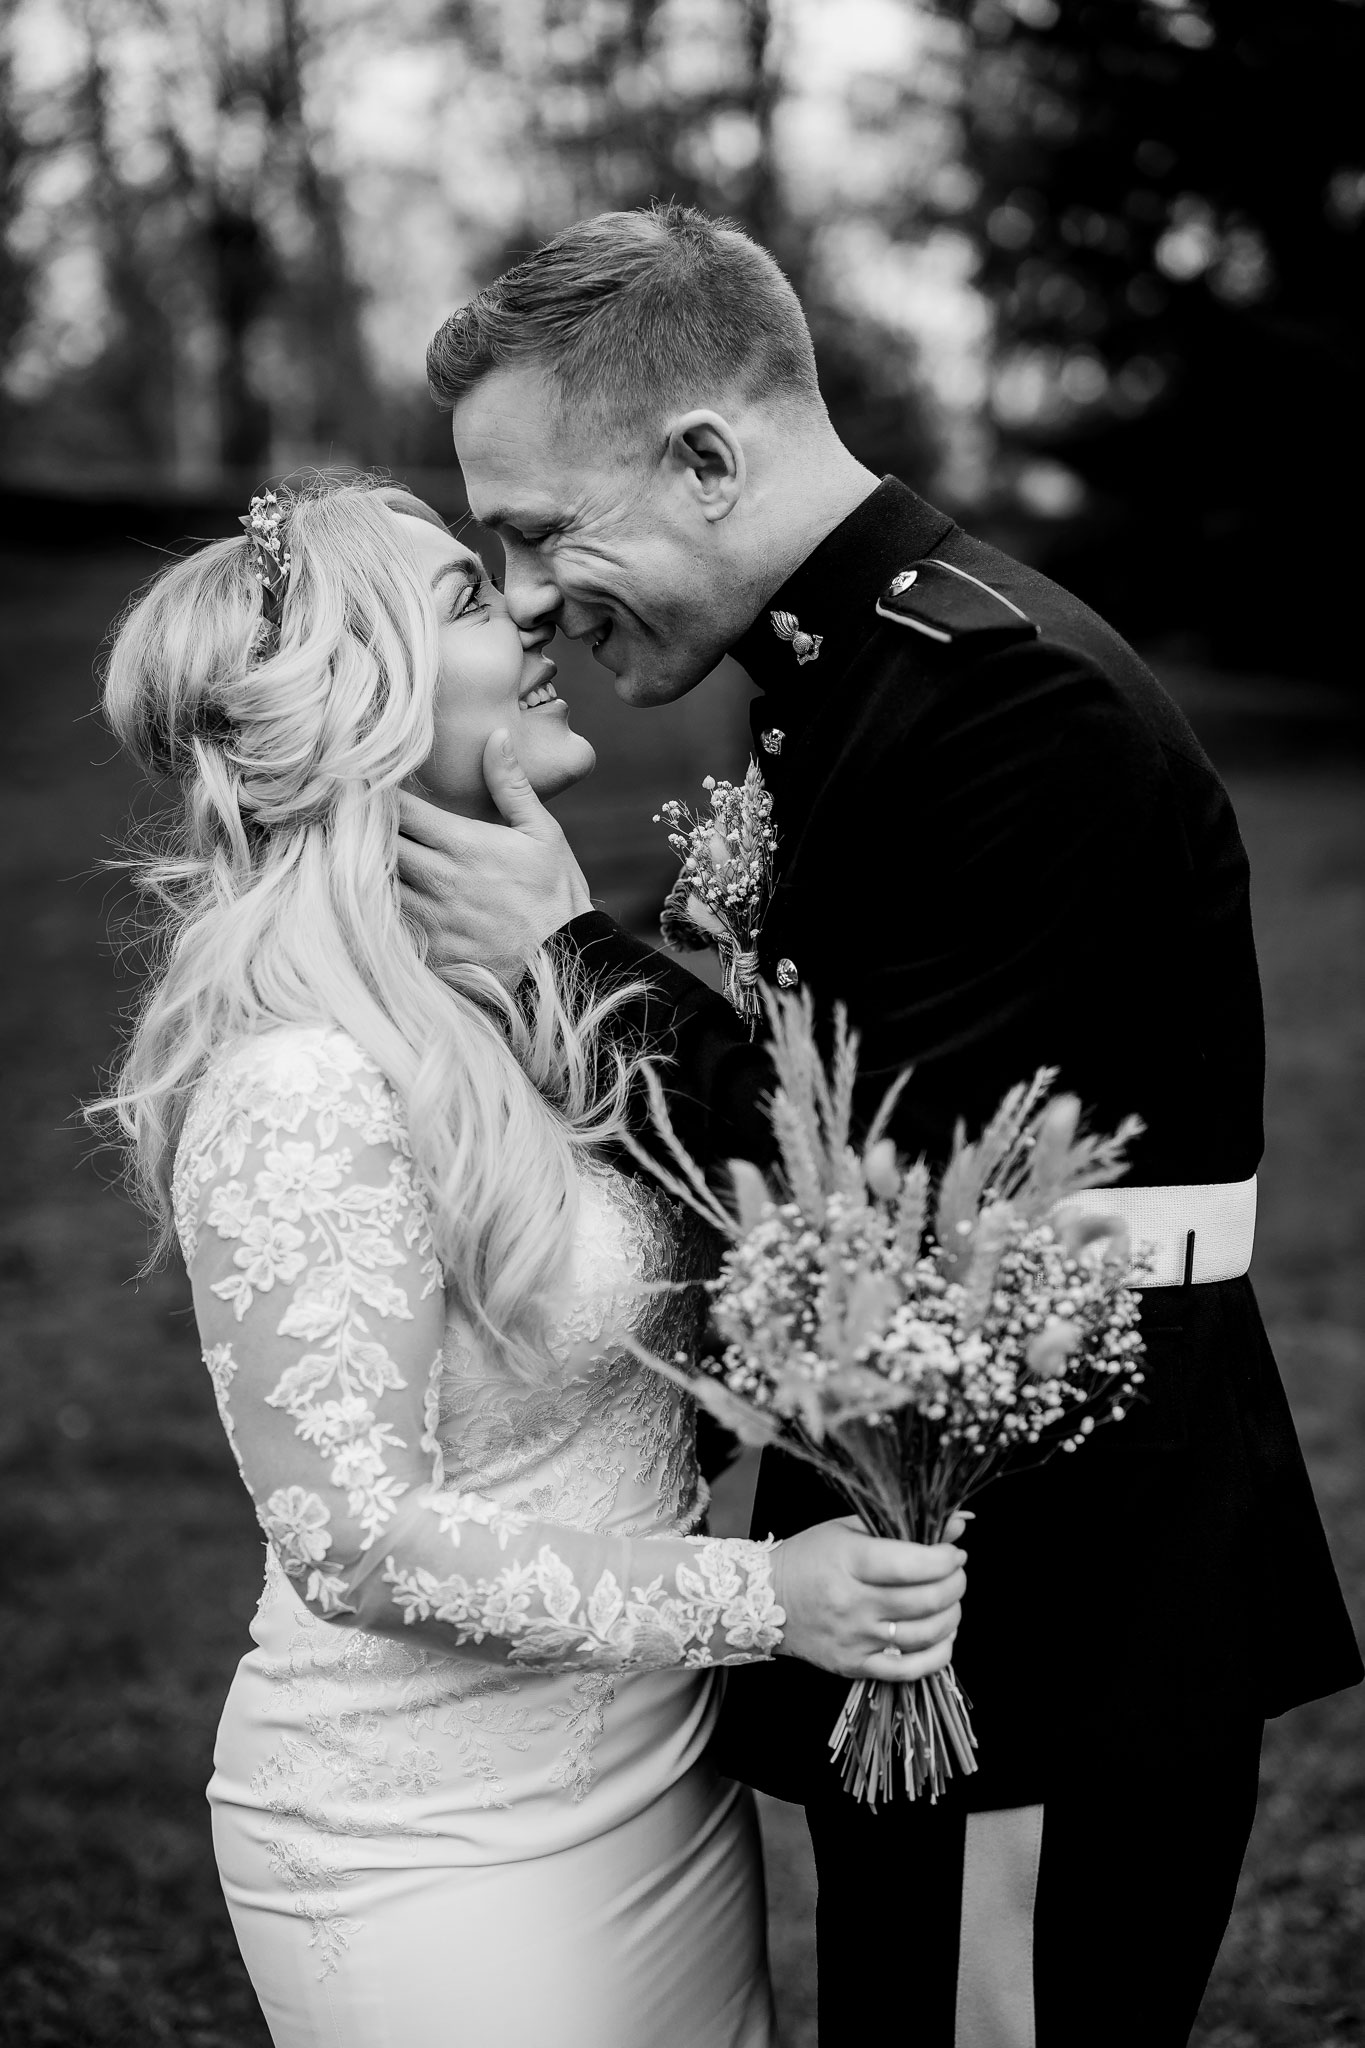 a monochrome image of the bride and groom